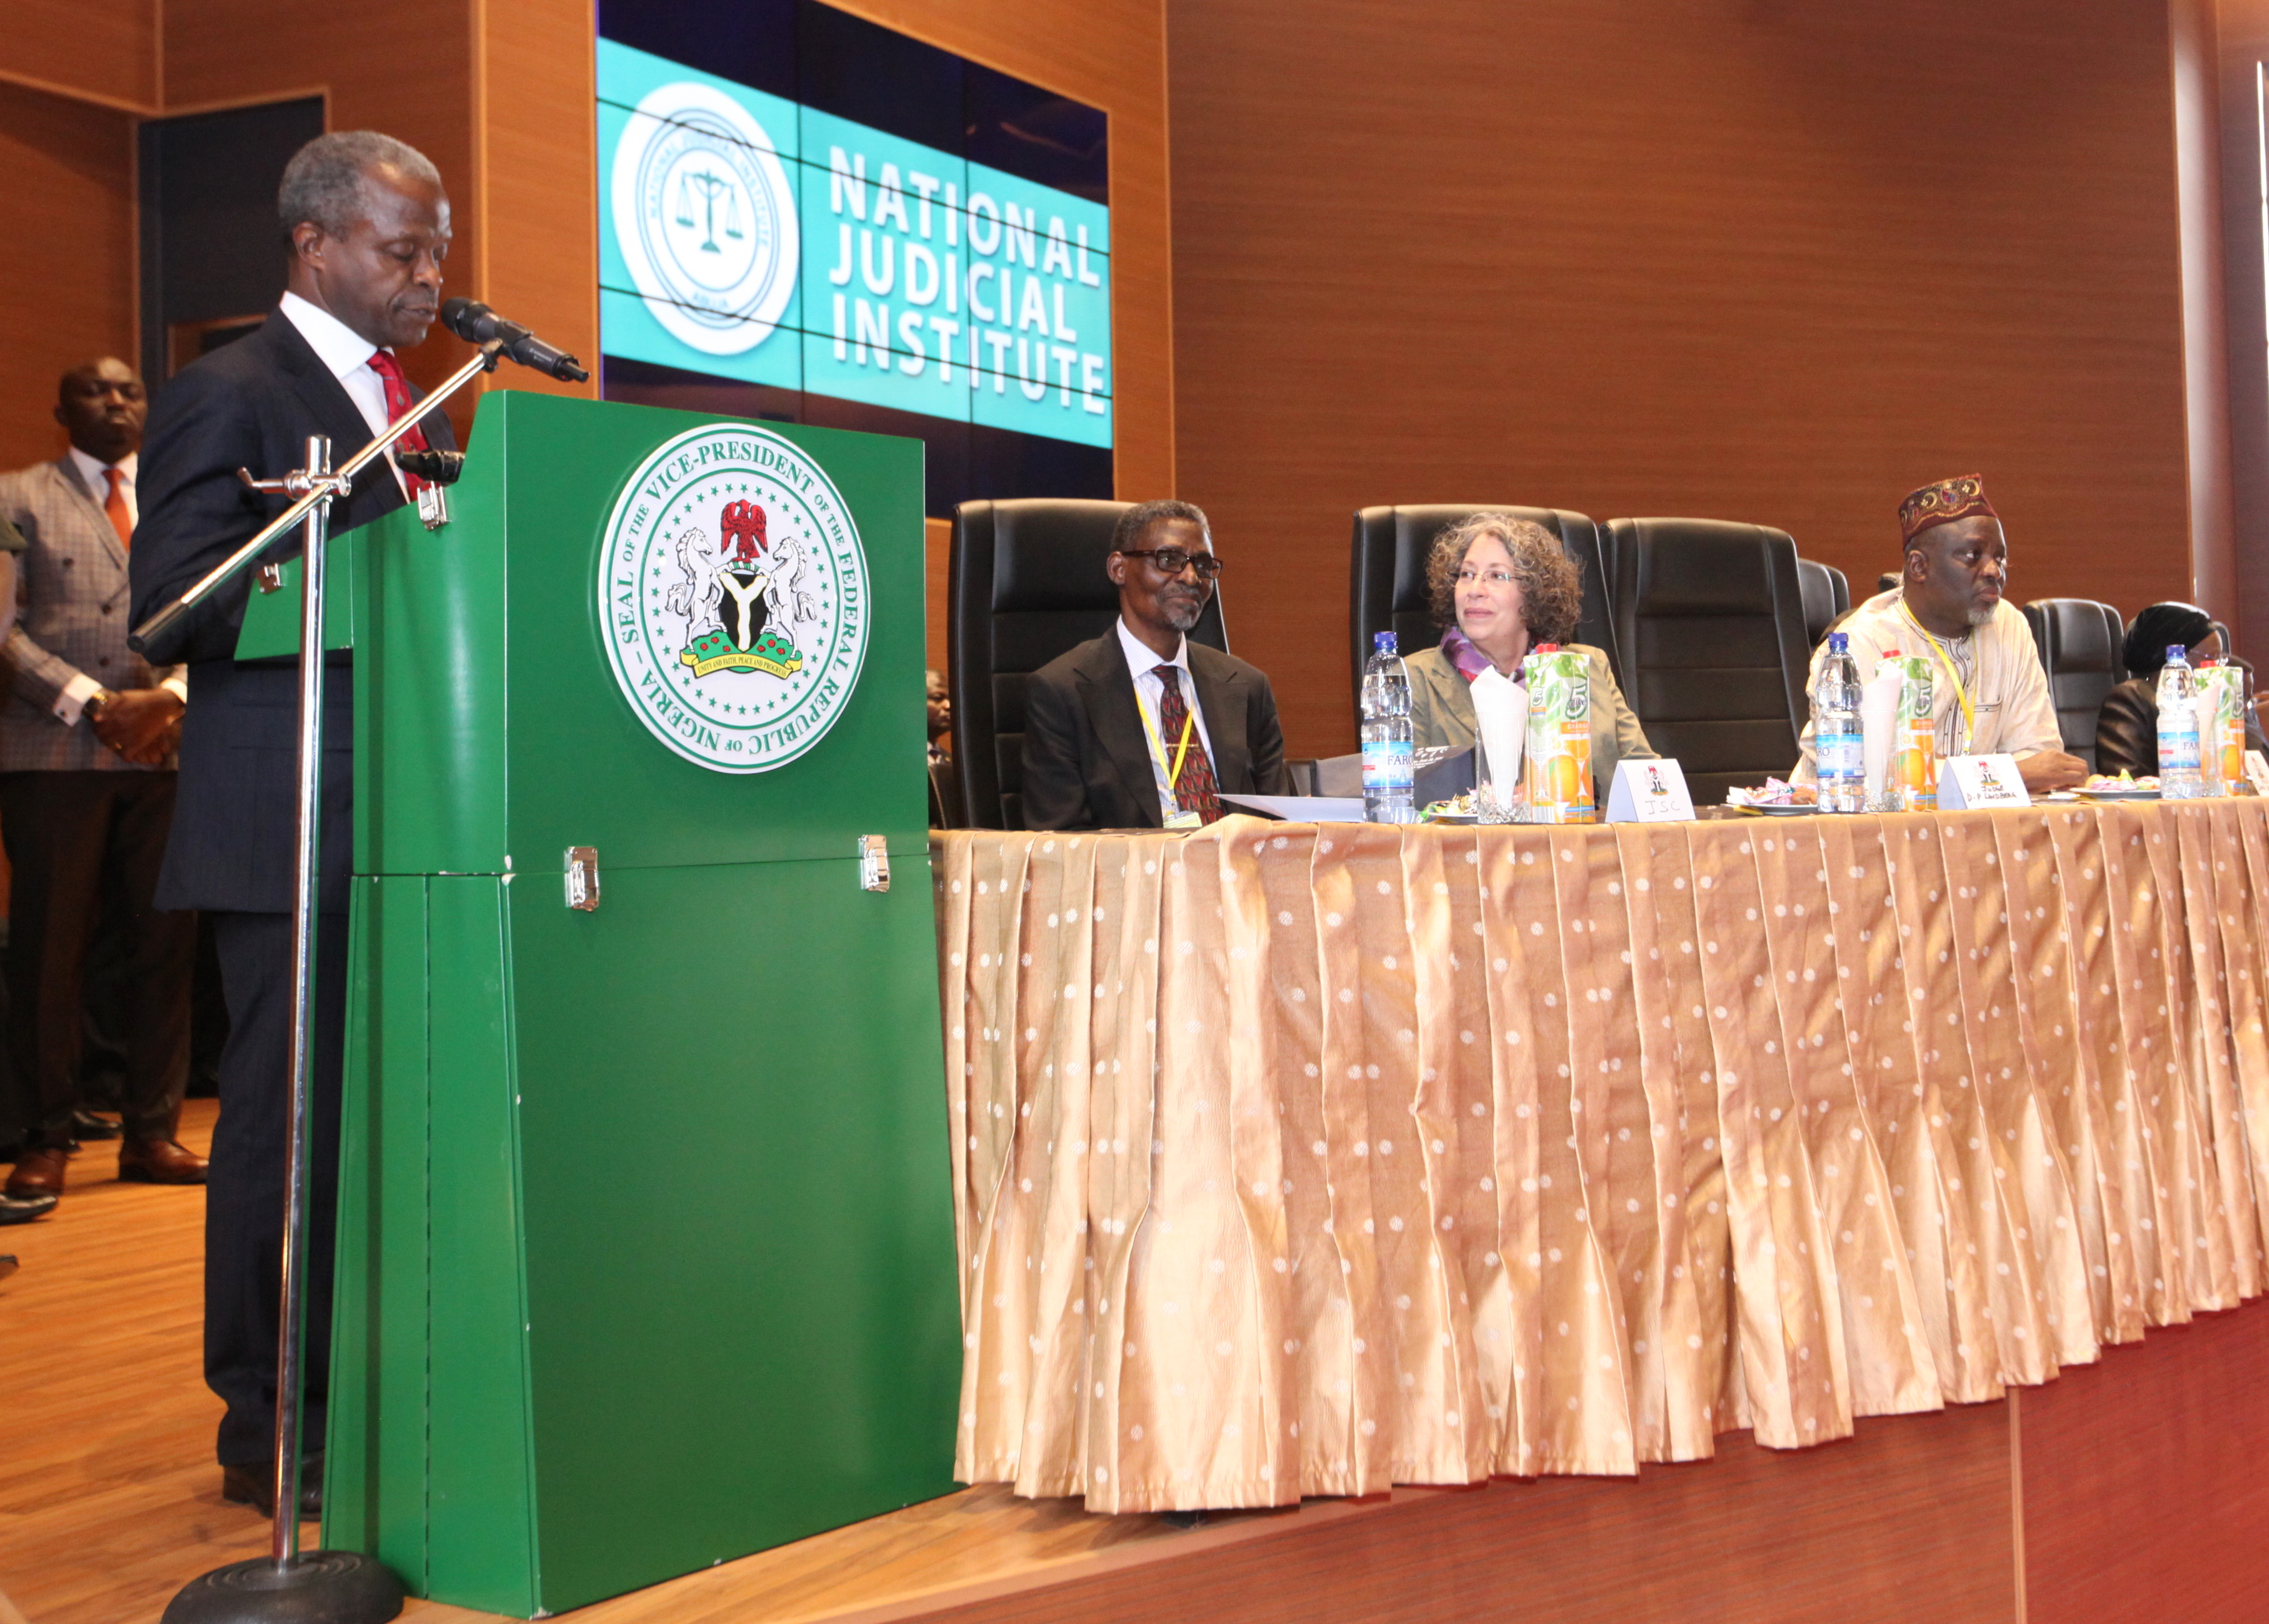 VP Osinbajo Attends The 1st National Judicial Roundtable On Intersection Of Law & Religion On 20/06/2016